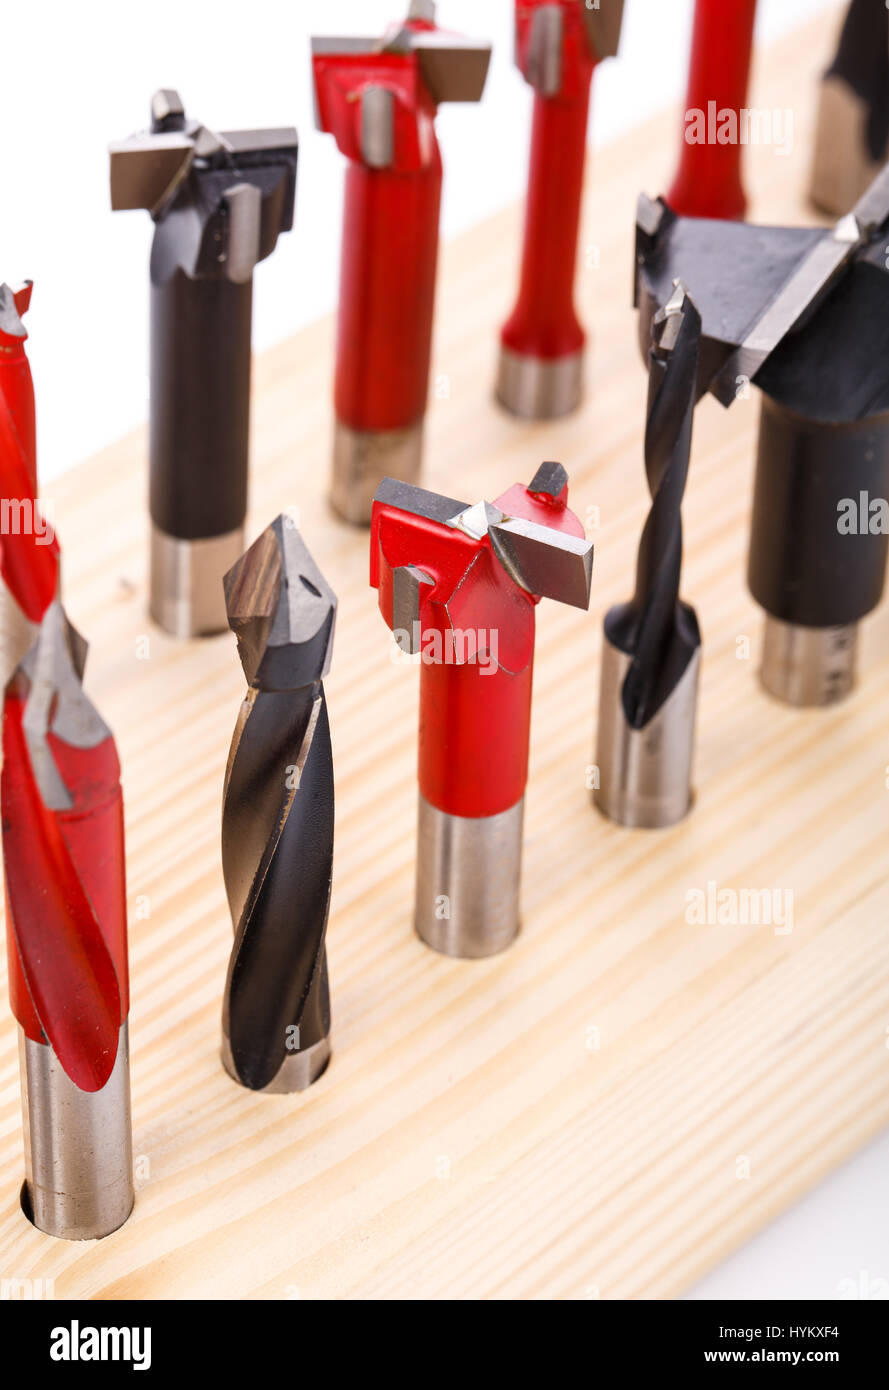 various shapes drill bits for wood on wooden stand. close-up Stock Photo